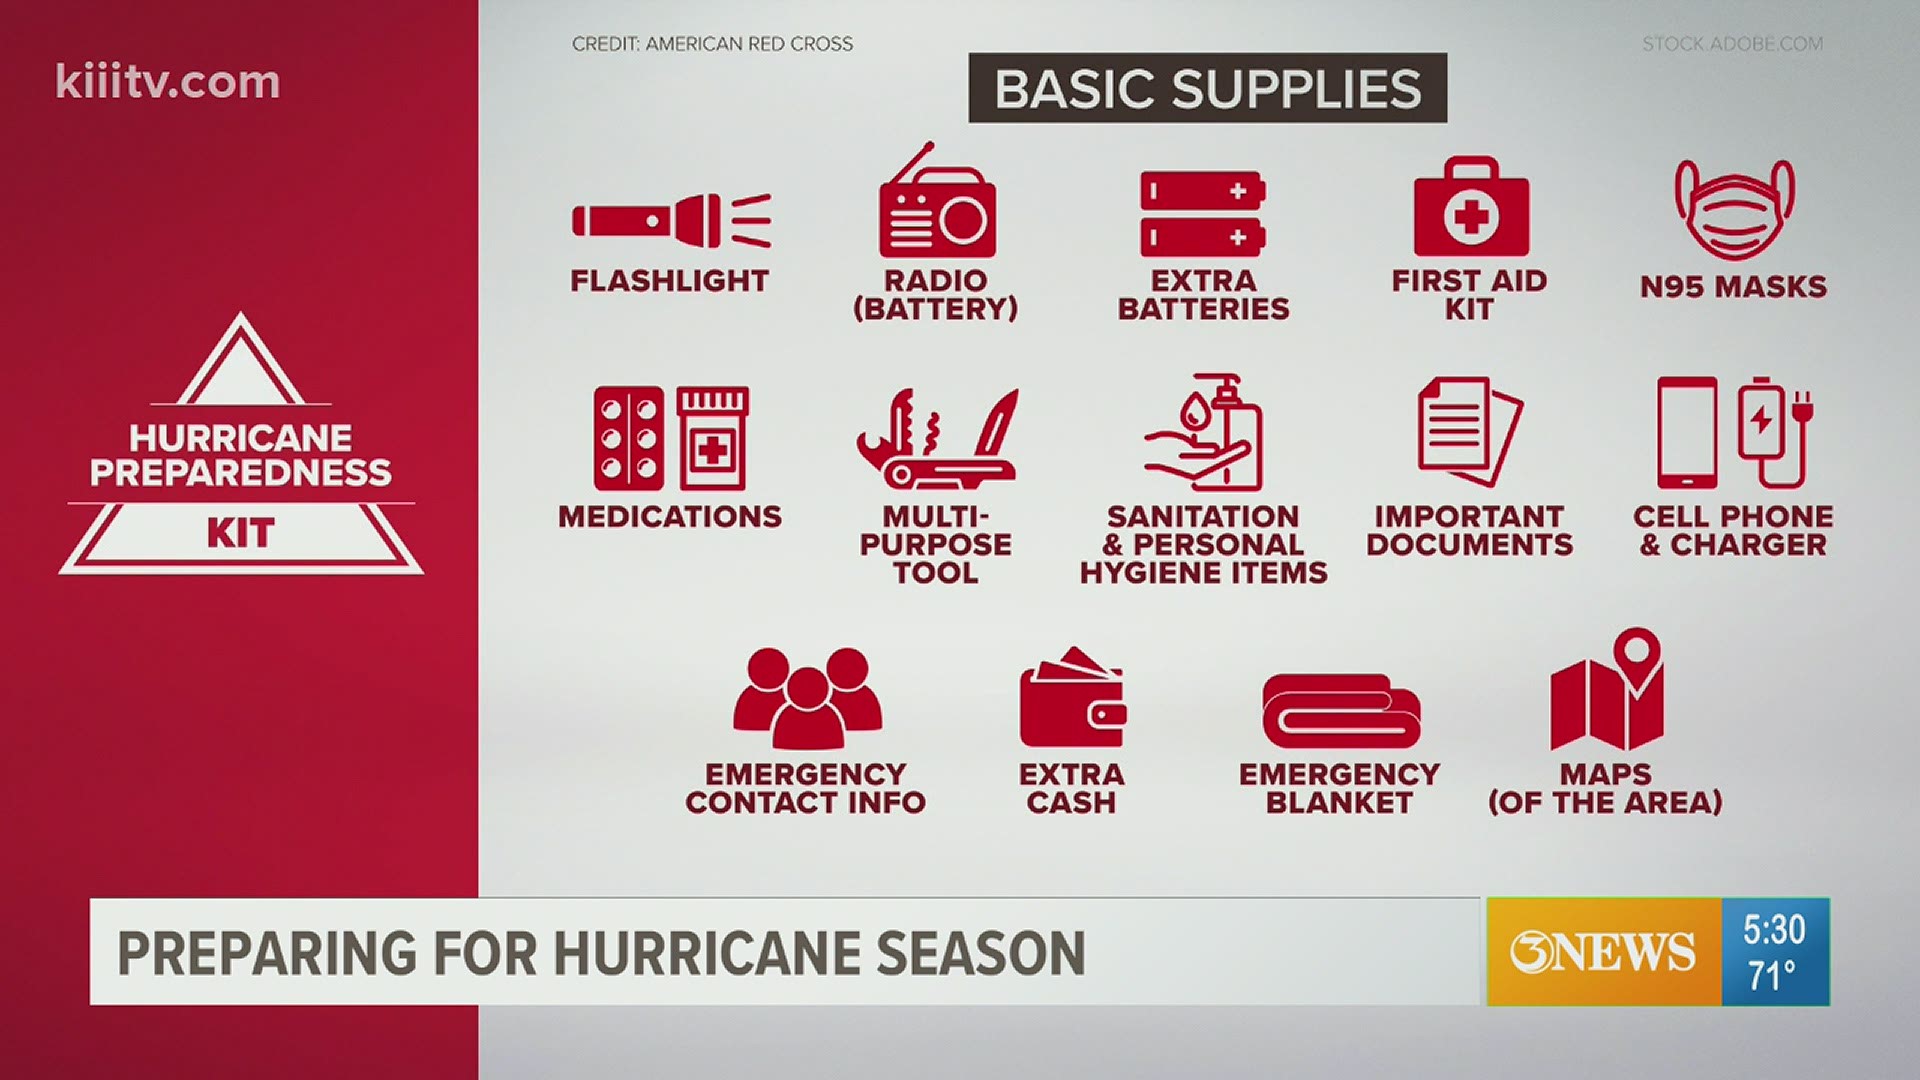 Here are the basics that should be in your hurricane kit.